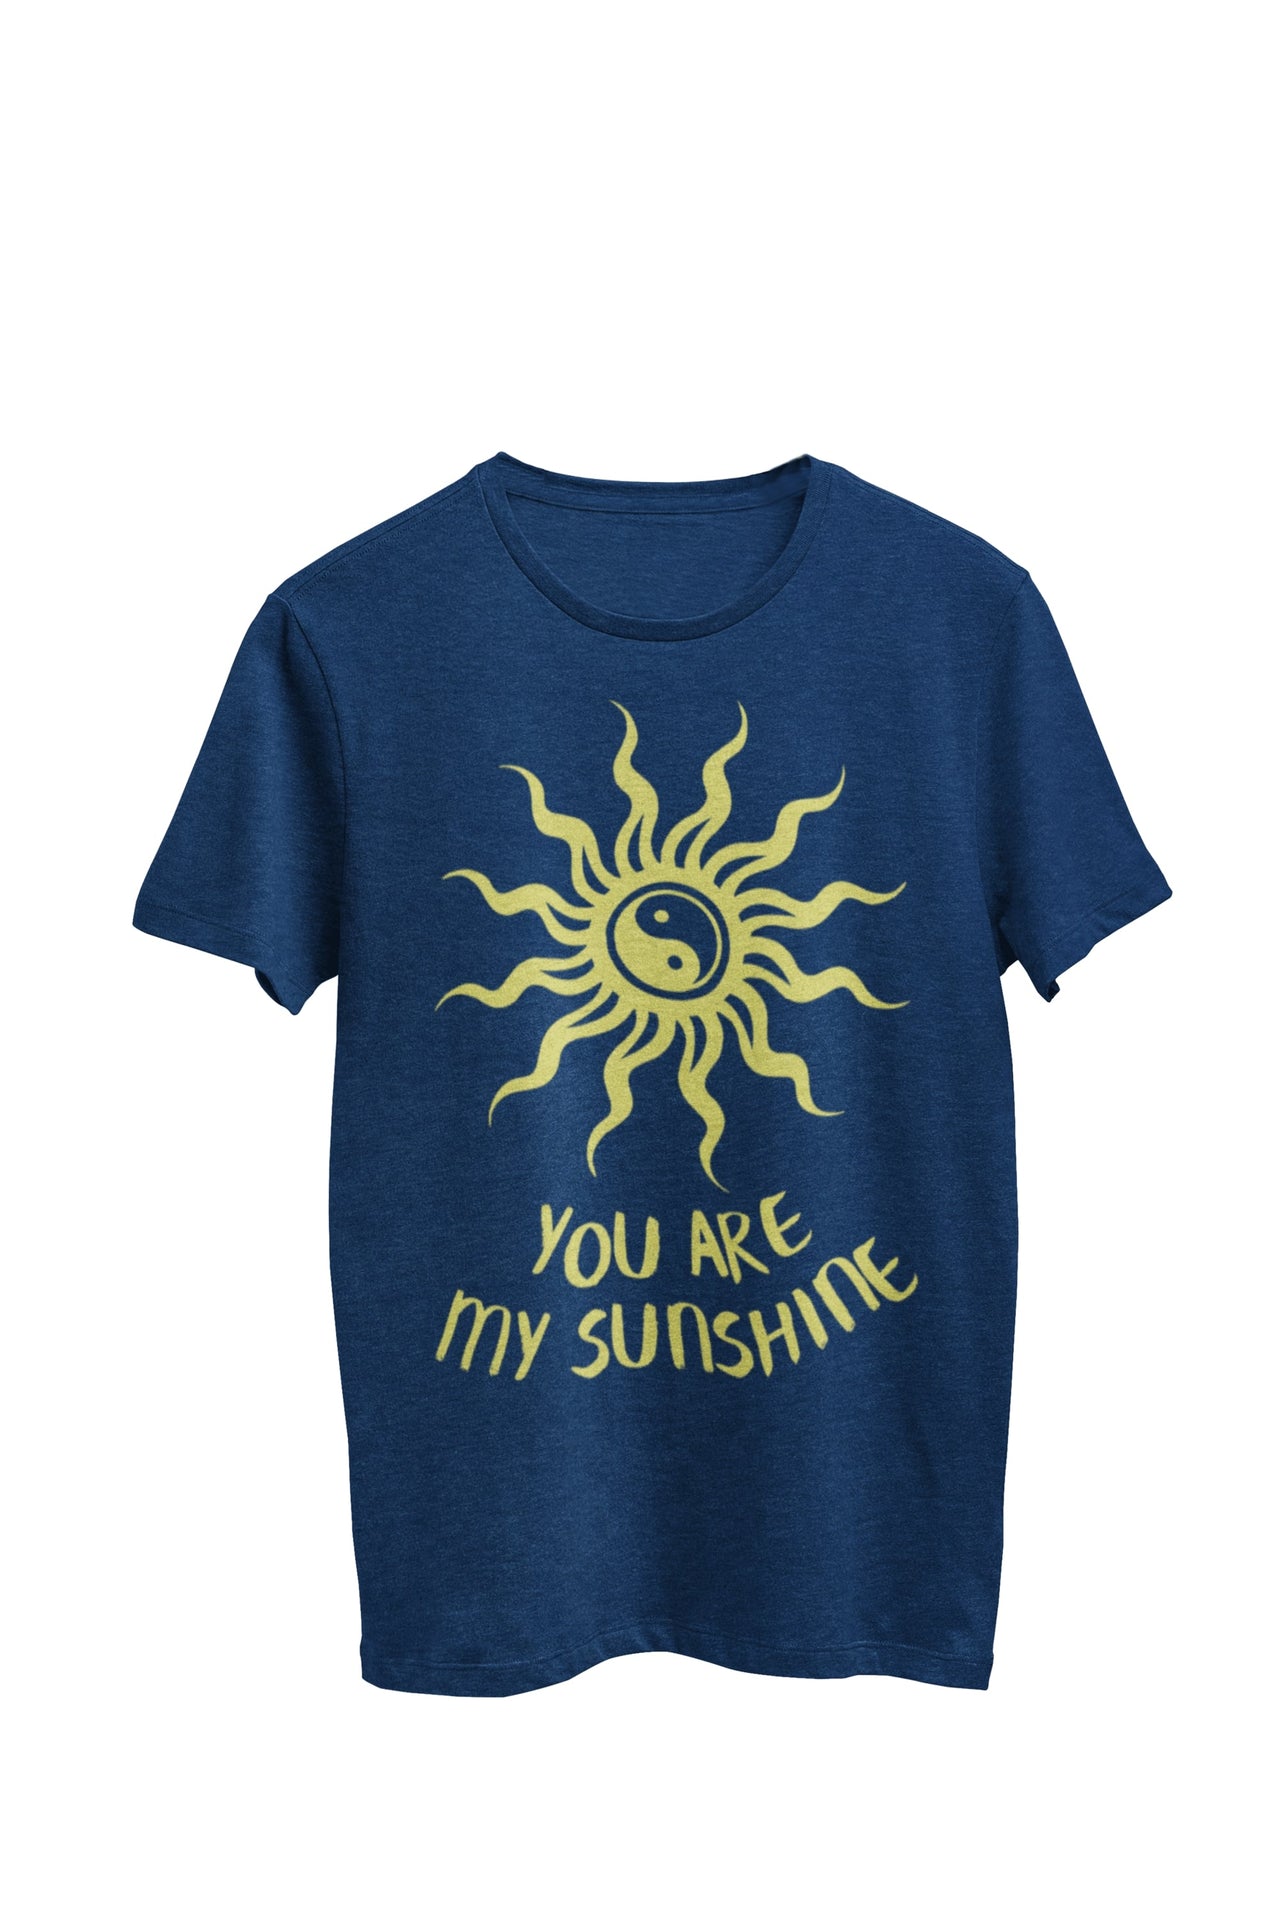 Navy Heather Unisex Tee featuring a Yin Yang sun with bold rays and the text 'You are my sunshine', designed by WooHoo Apparel.